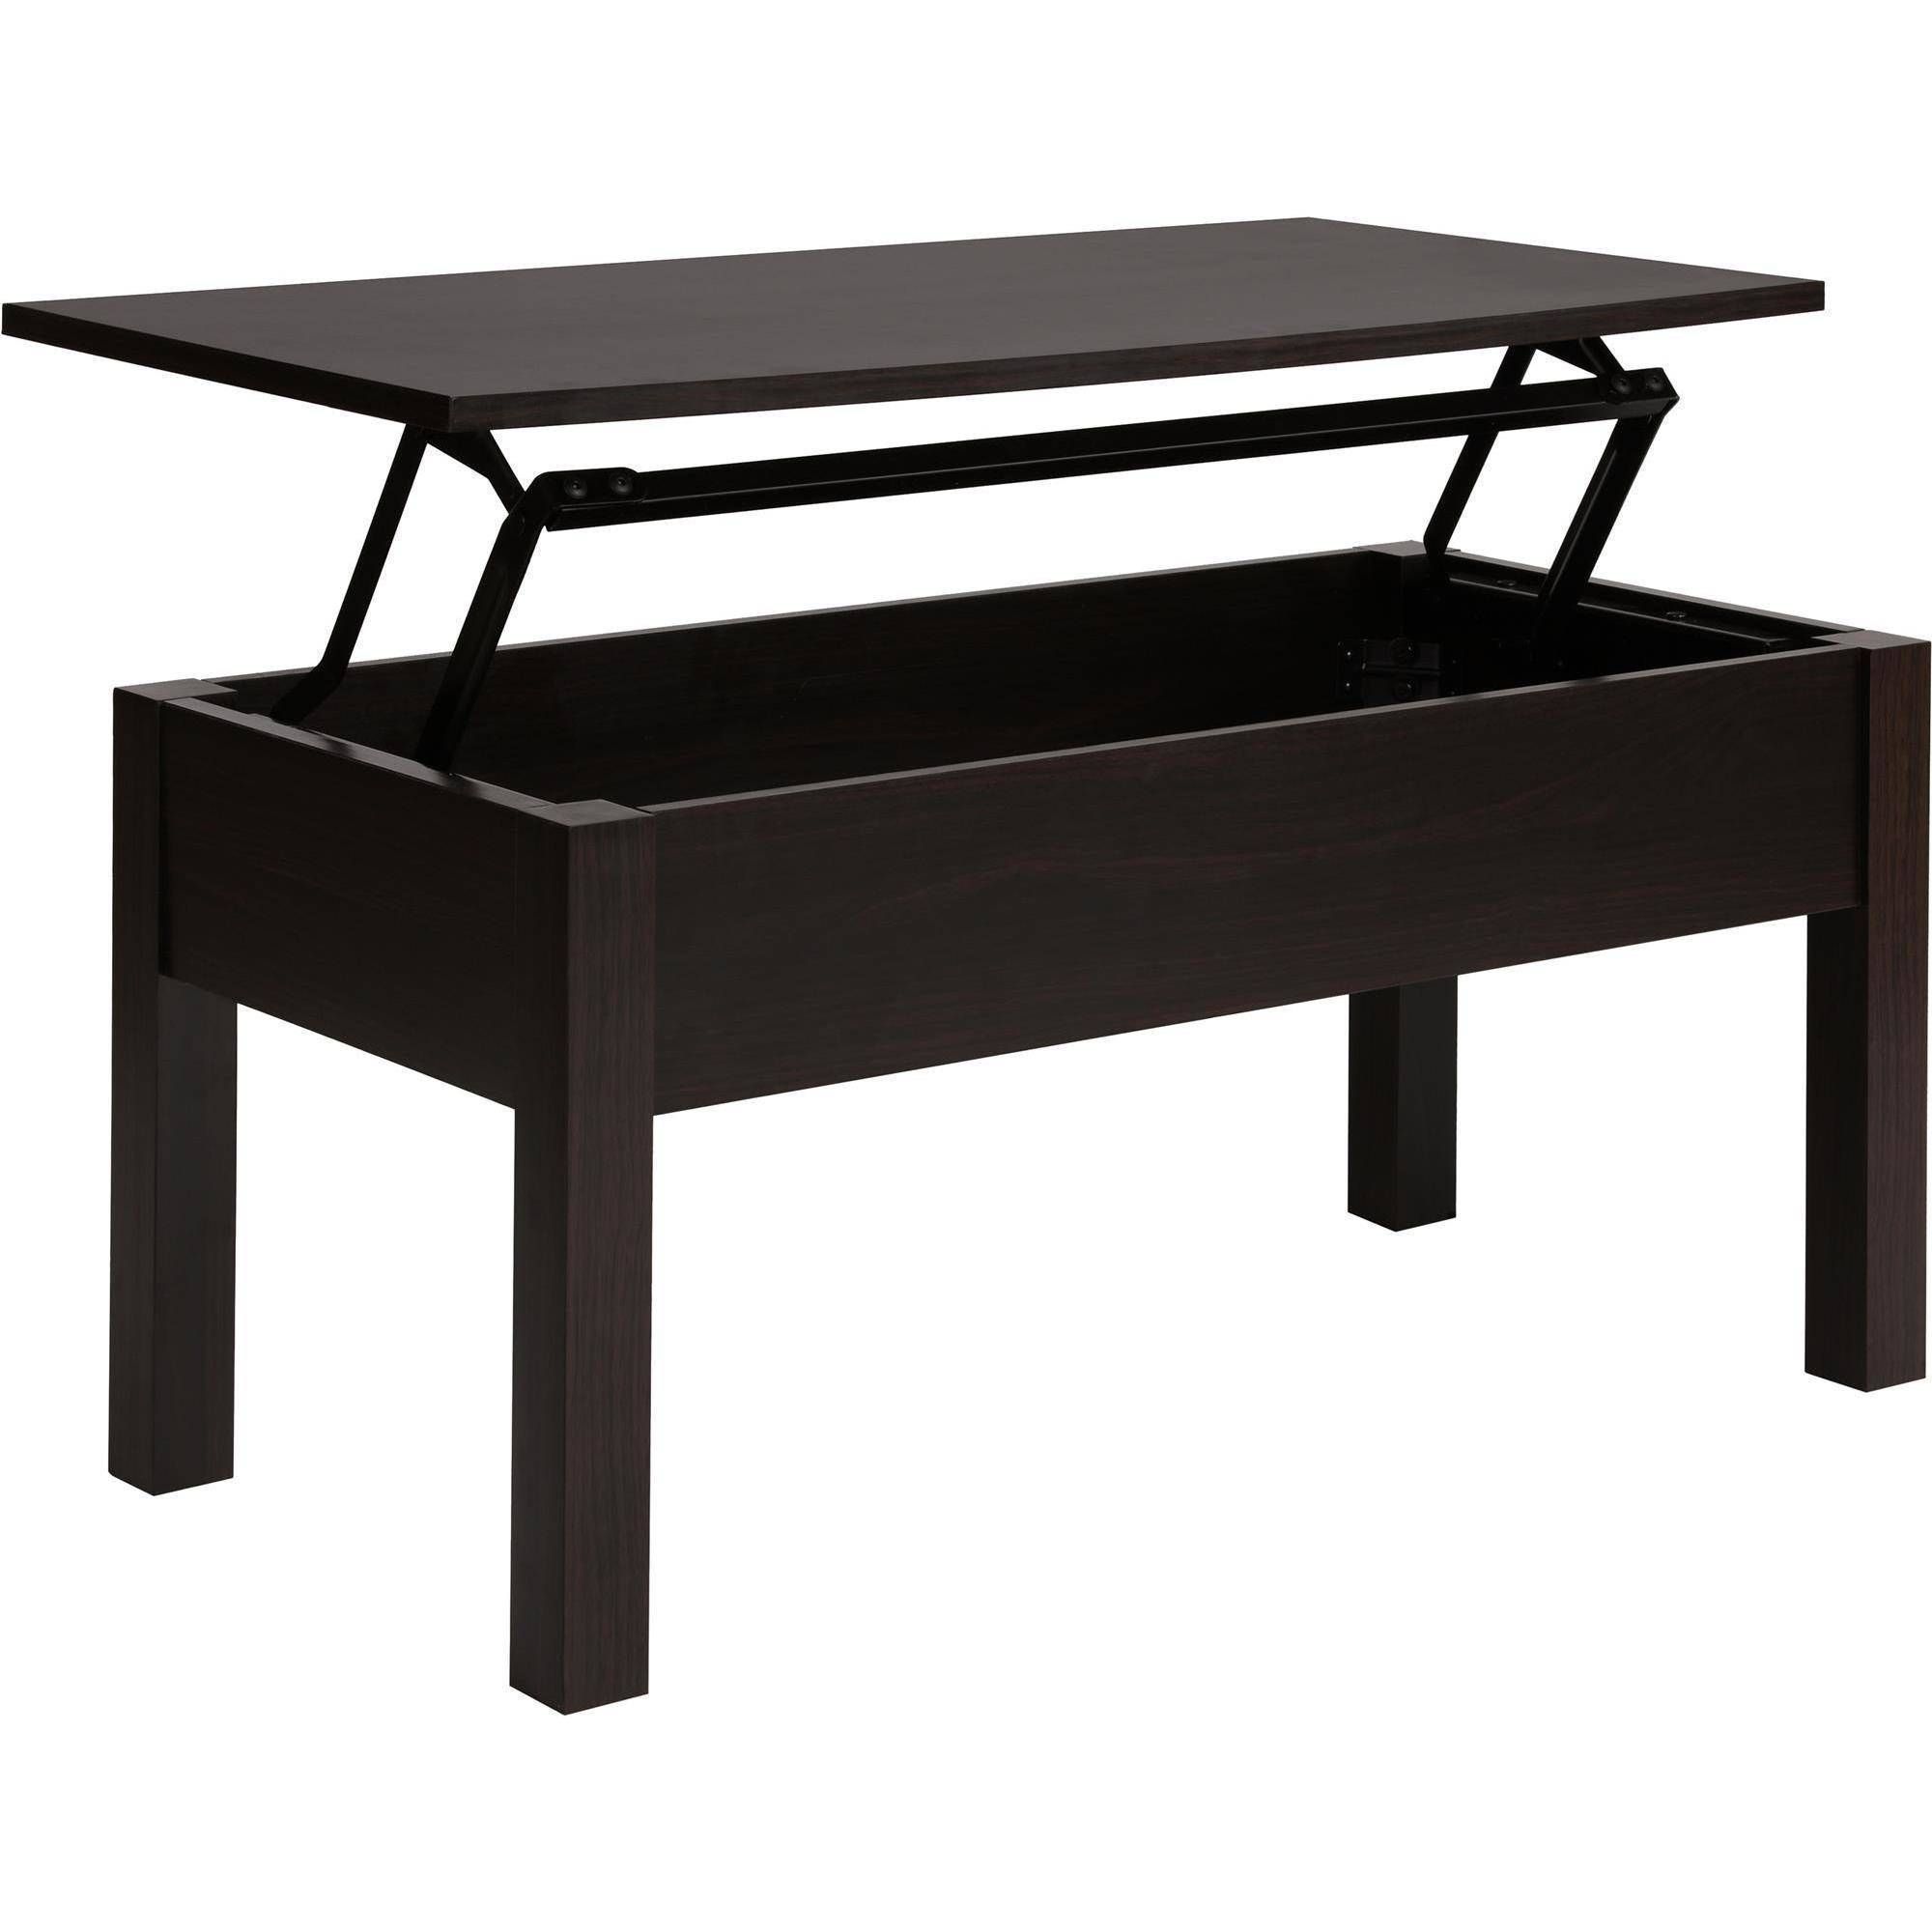 Mainstays Lift Top Coffee Table, Multiple Colors – Walmart Throughout Raisable Coffee Tables (View 2 of 30)